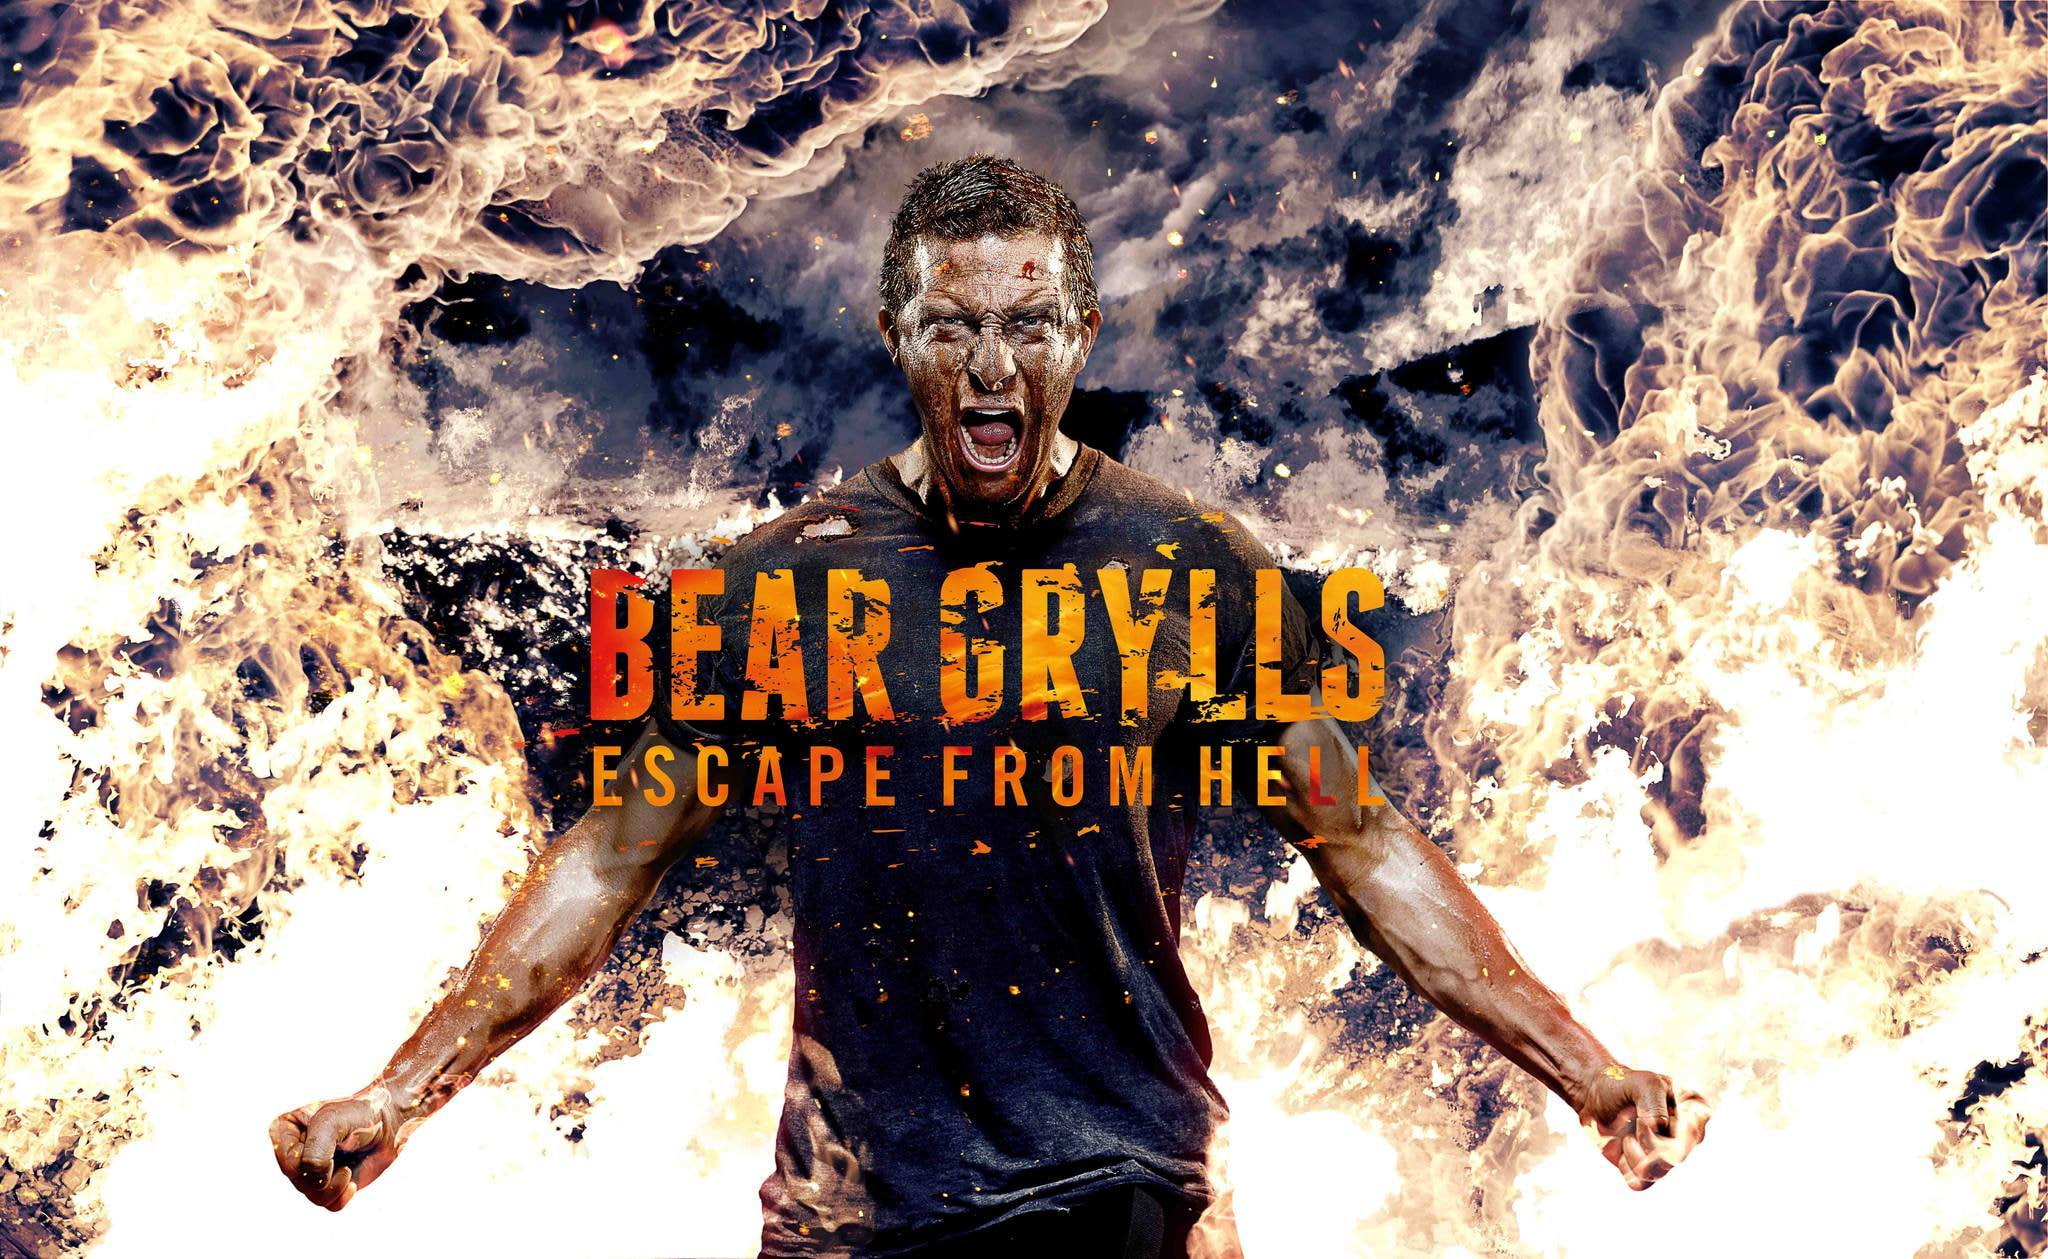 Fire, Man, Escape, Discovery, Bear Grylls, Vedmed, - Bear Grylls Escape From Hell , HD Wallpaper & Backgrounds